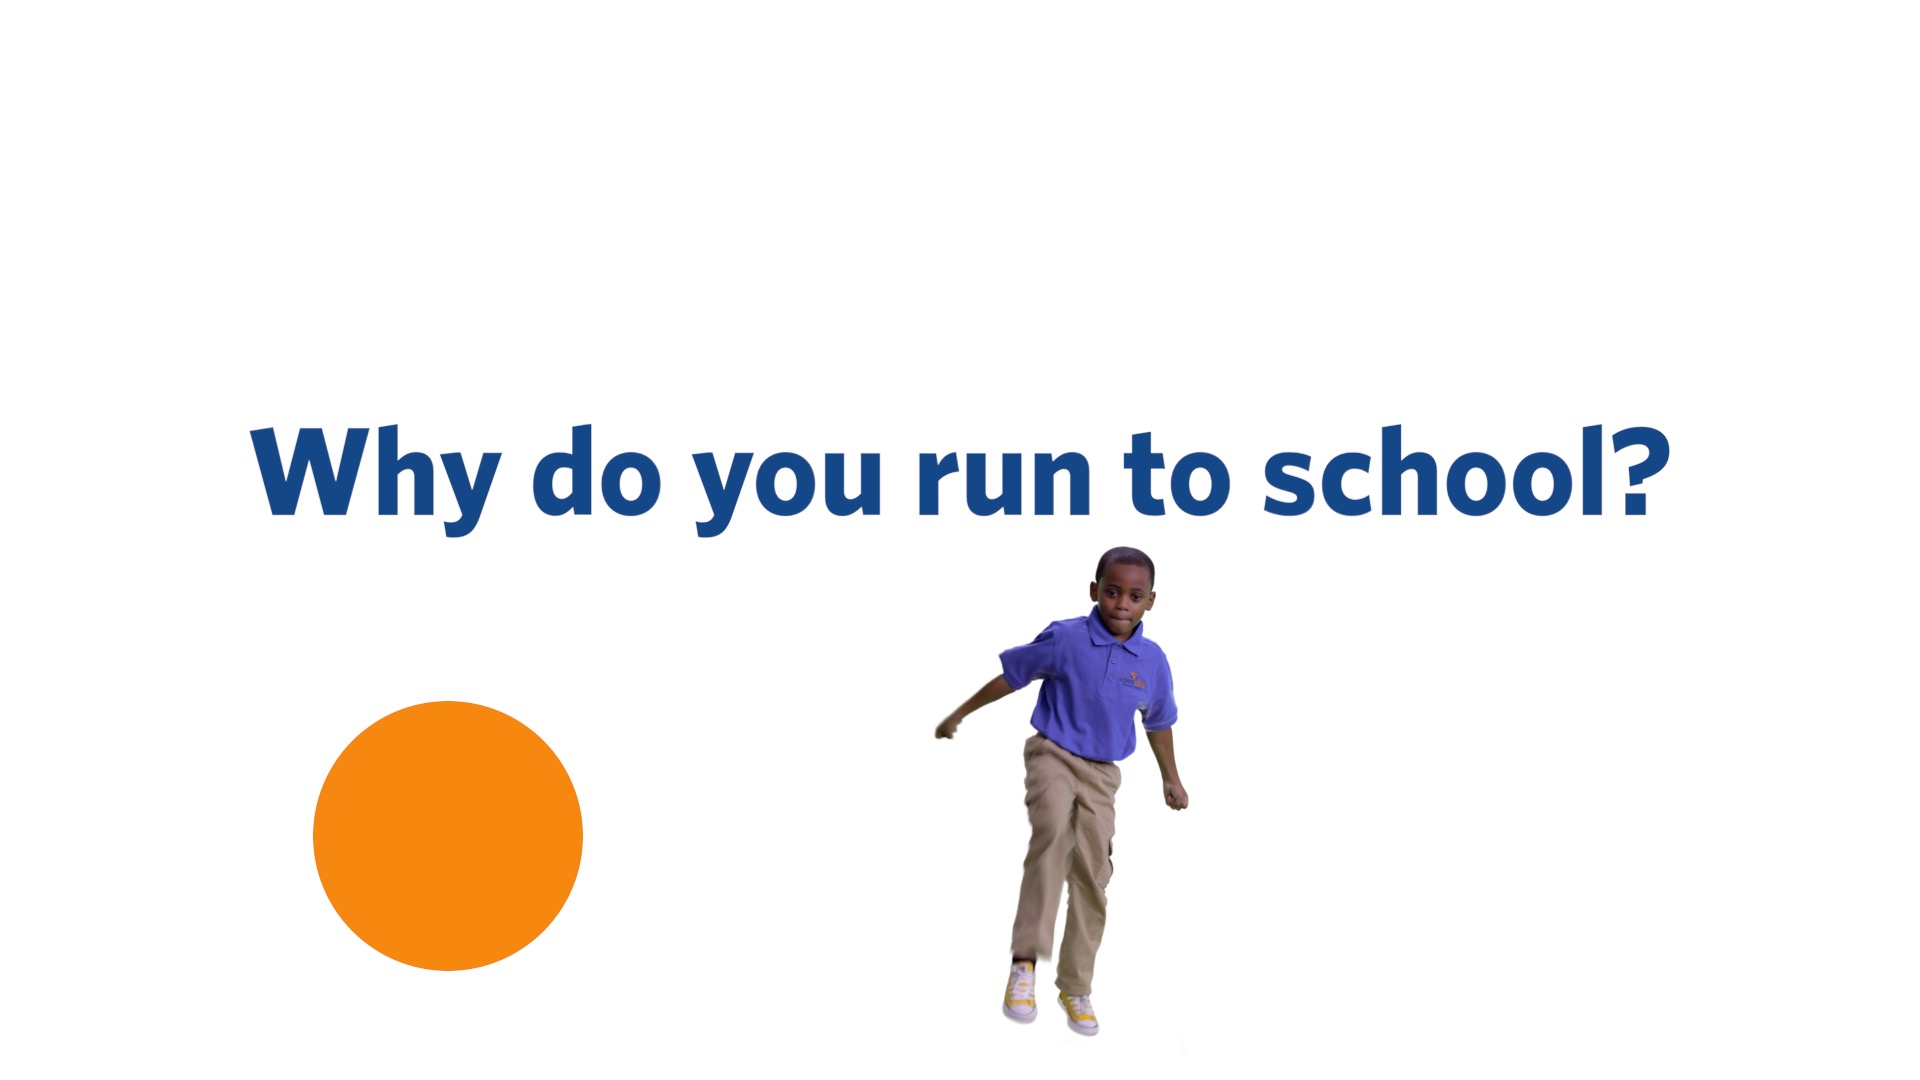 Why do you run to school?